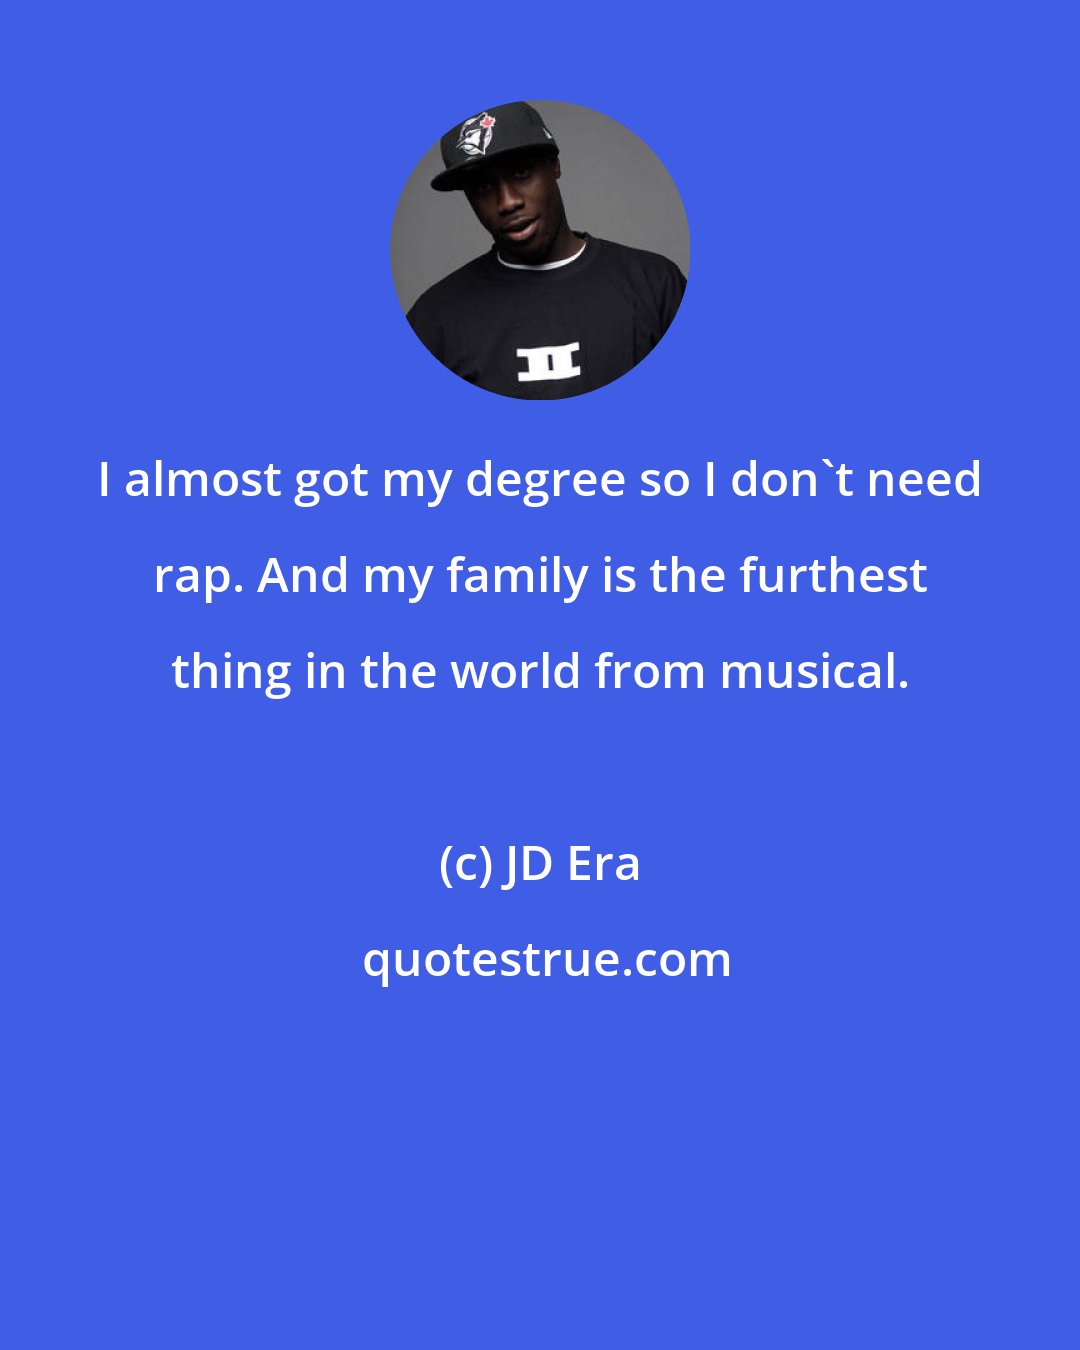 JD Era: I almost got my degree so I don't need rap. And my family is the furthest thing in the world from musical.